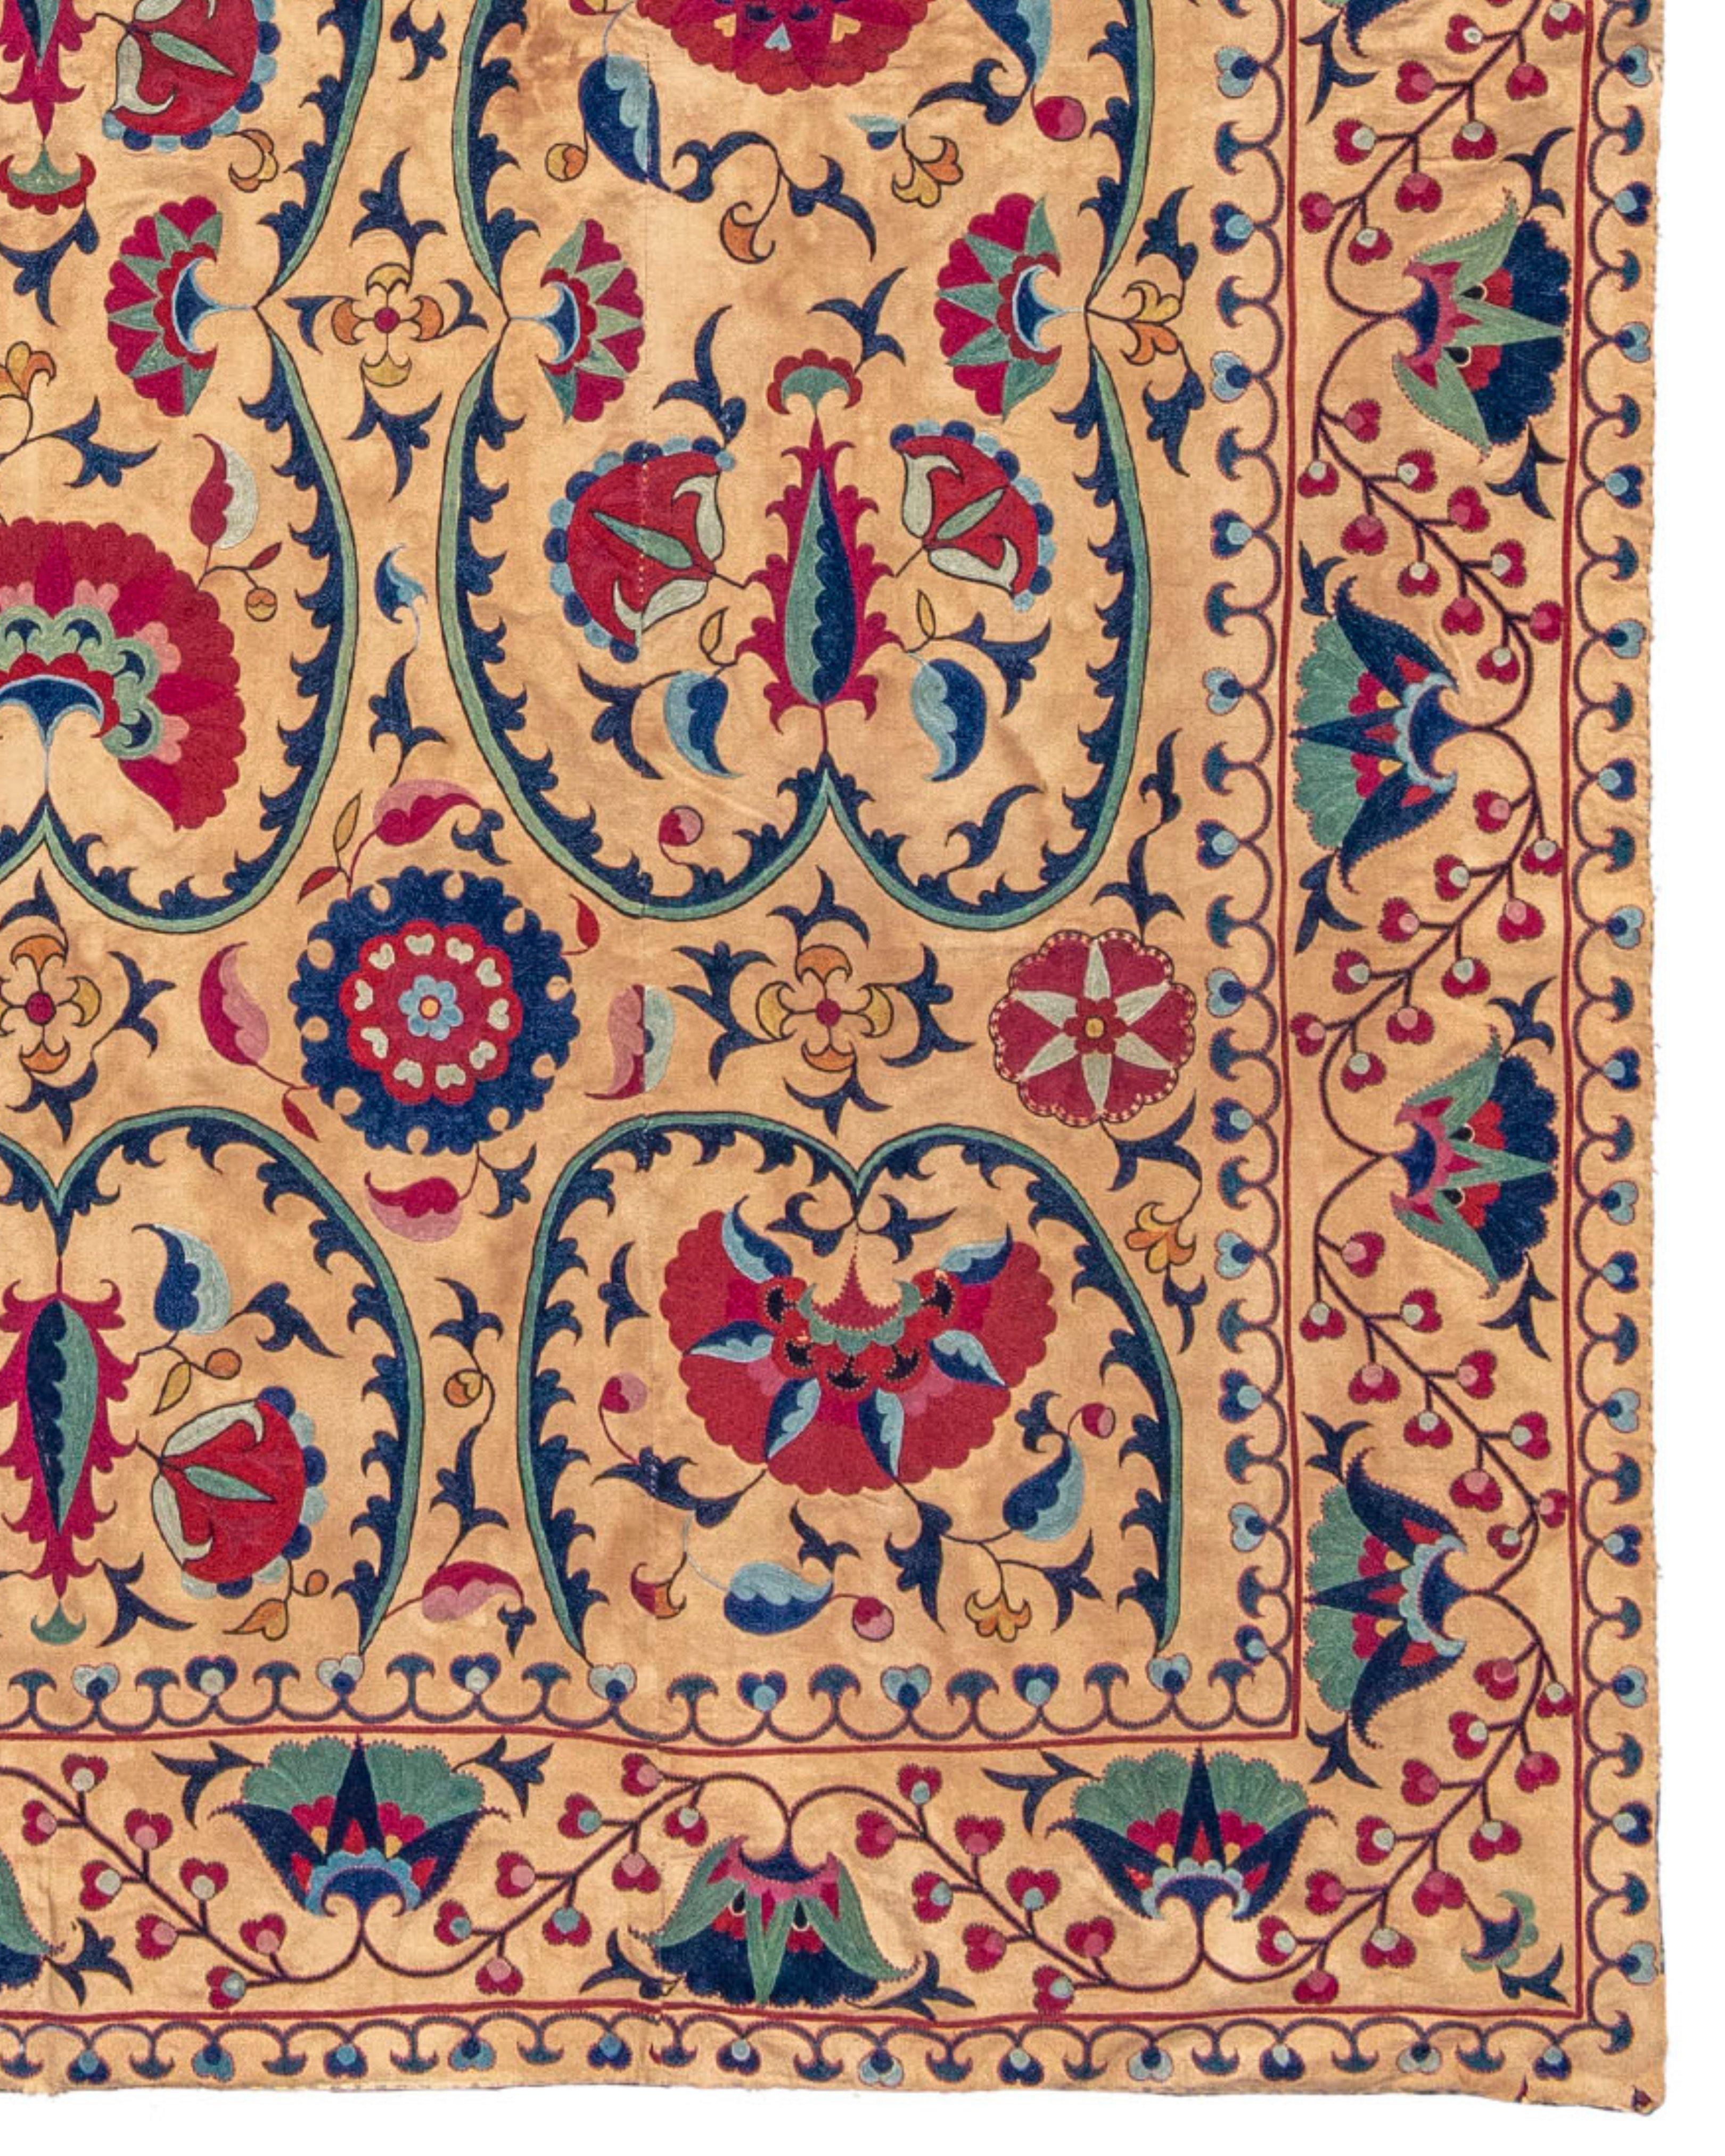 Antique Uzbek Suzani Embroidered Cover, 19th Century

This piece is part of the David McInnis collection.

Additional Information:
Dimensions: 5'5